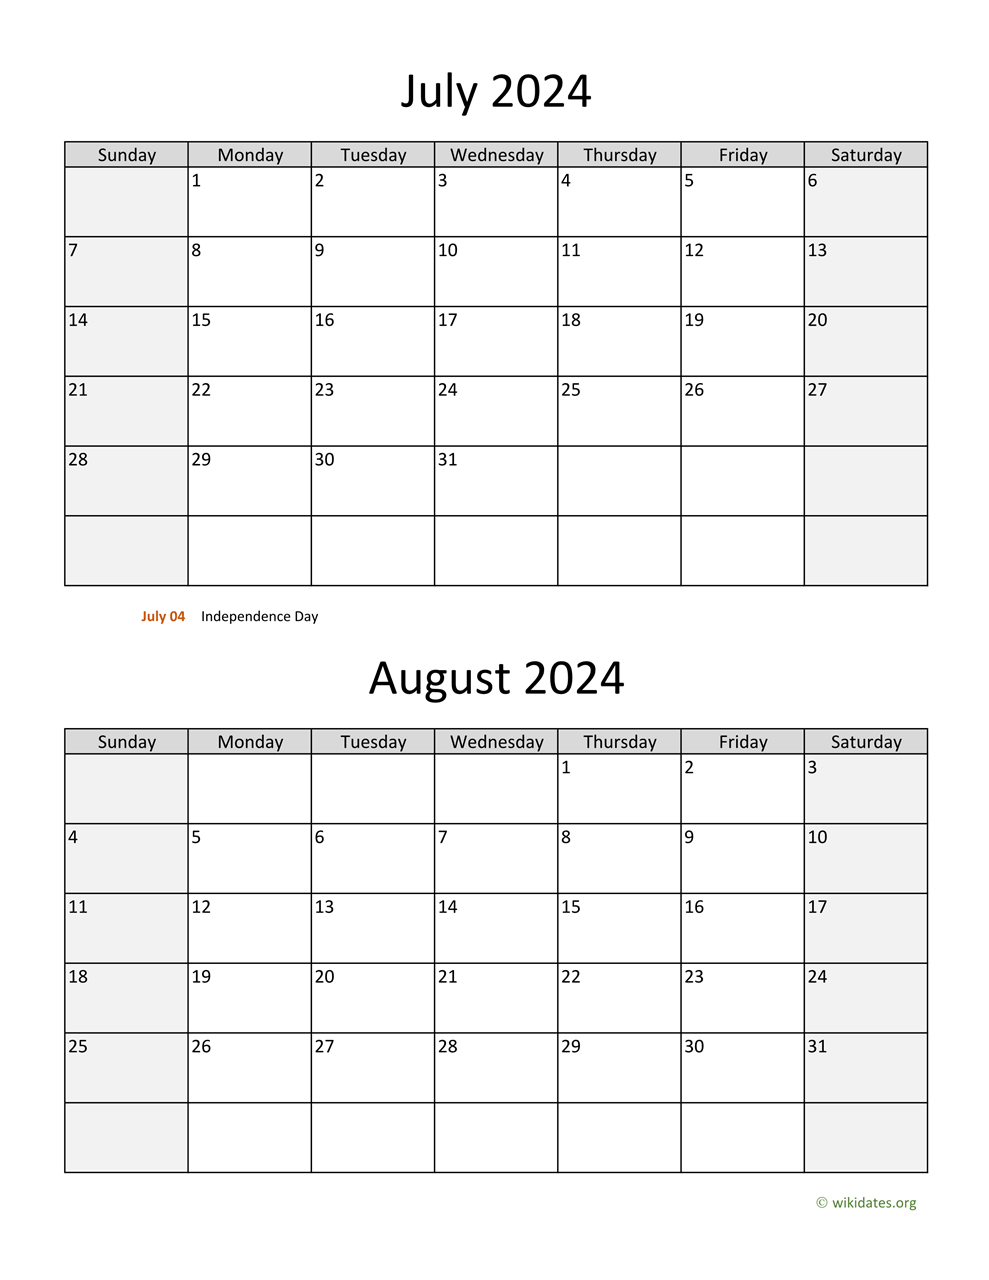 July And August 2024 Calendar | Wikidates for Printable Calendar July August 2024